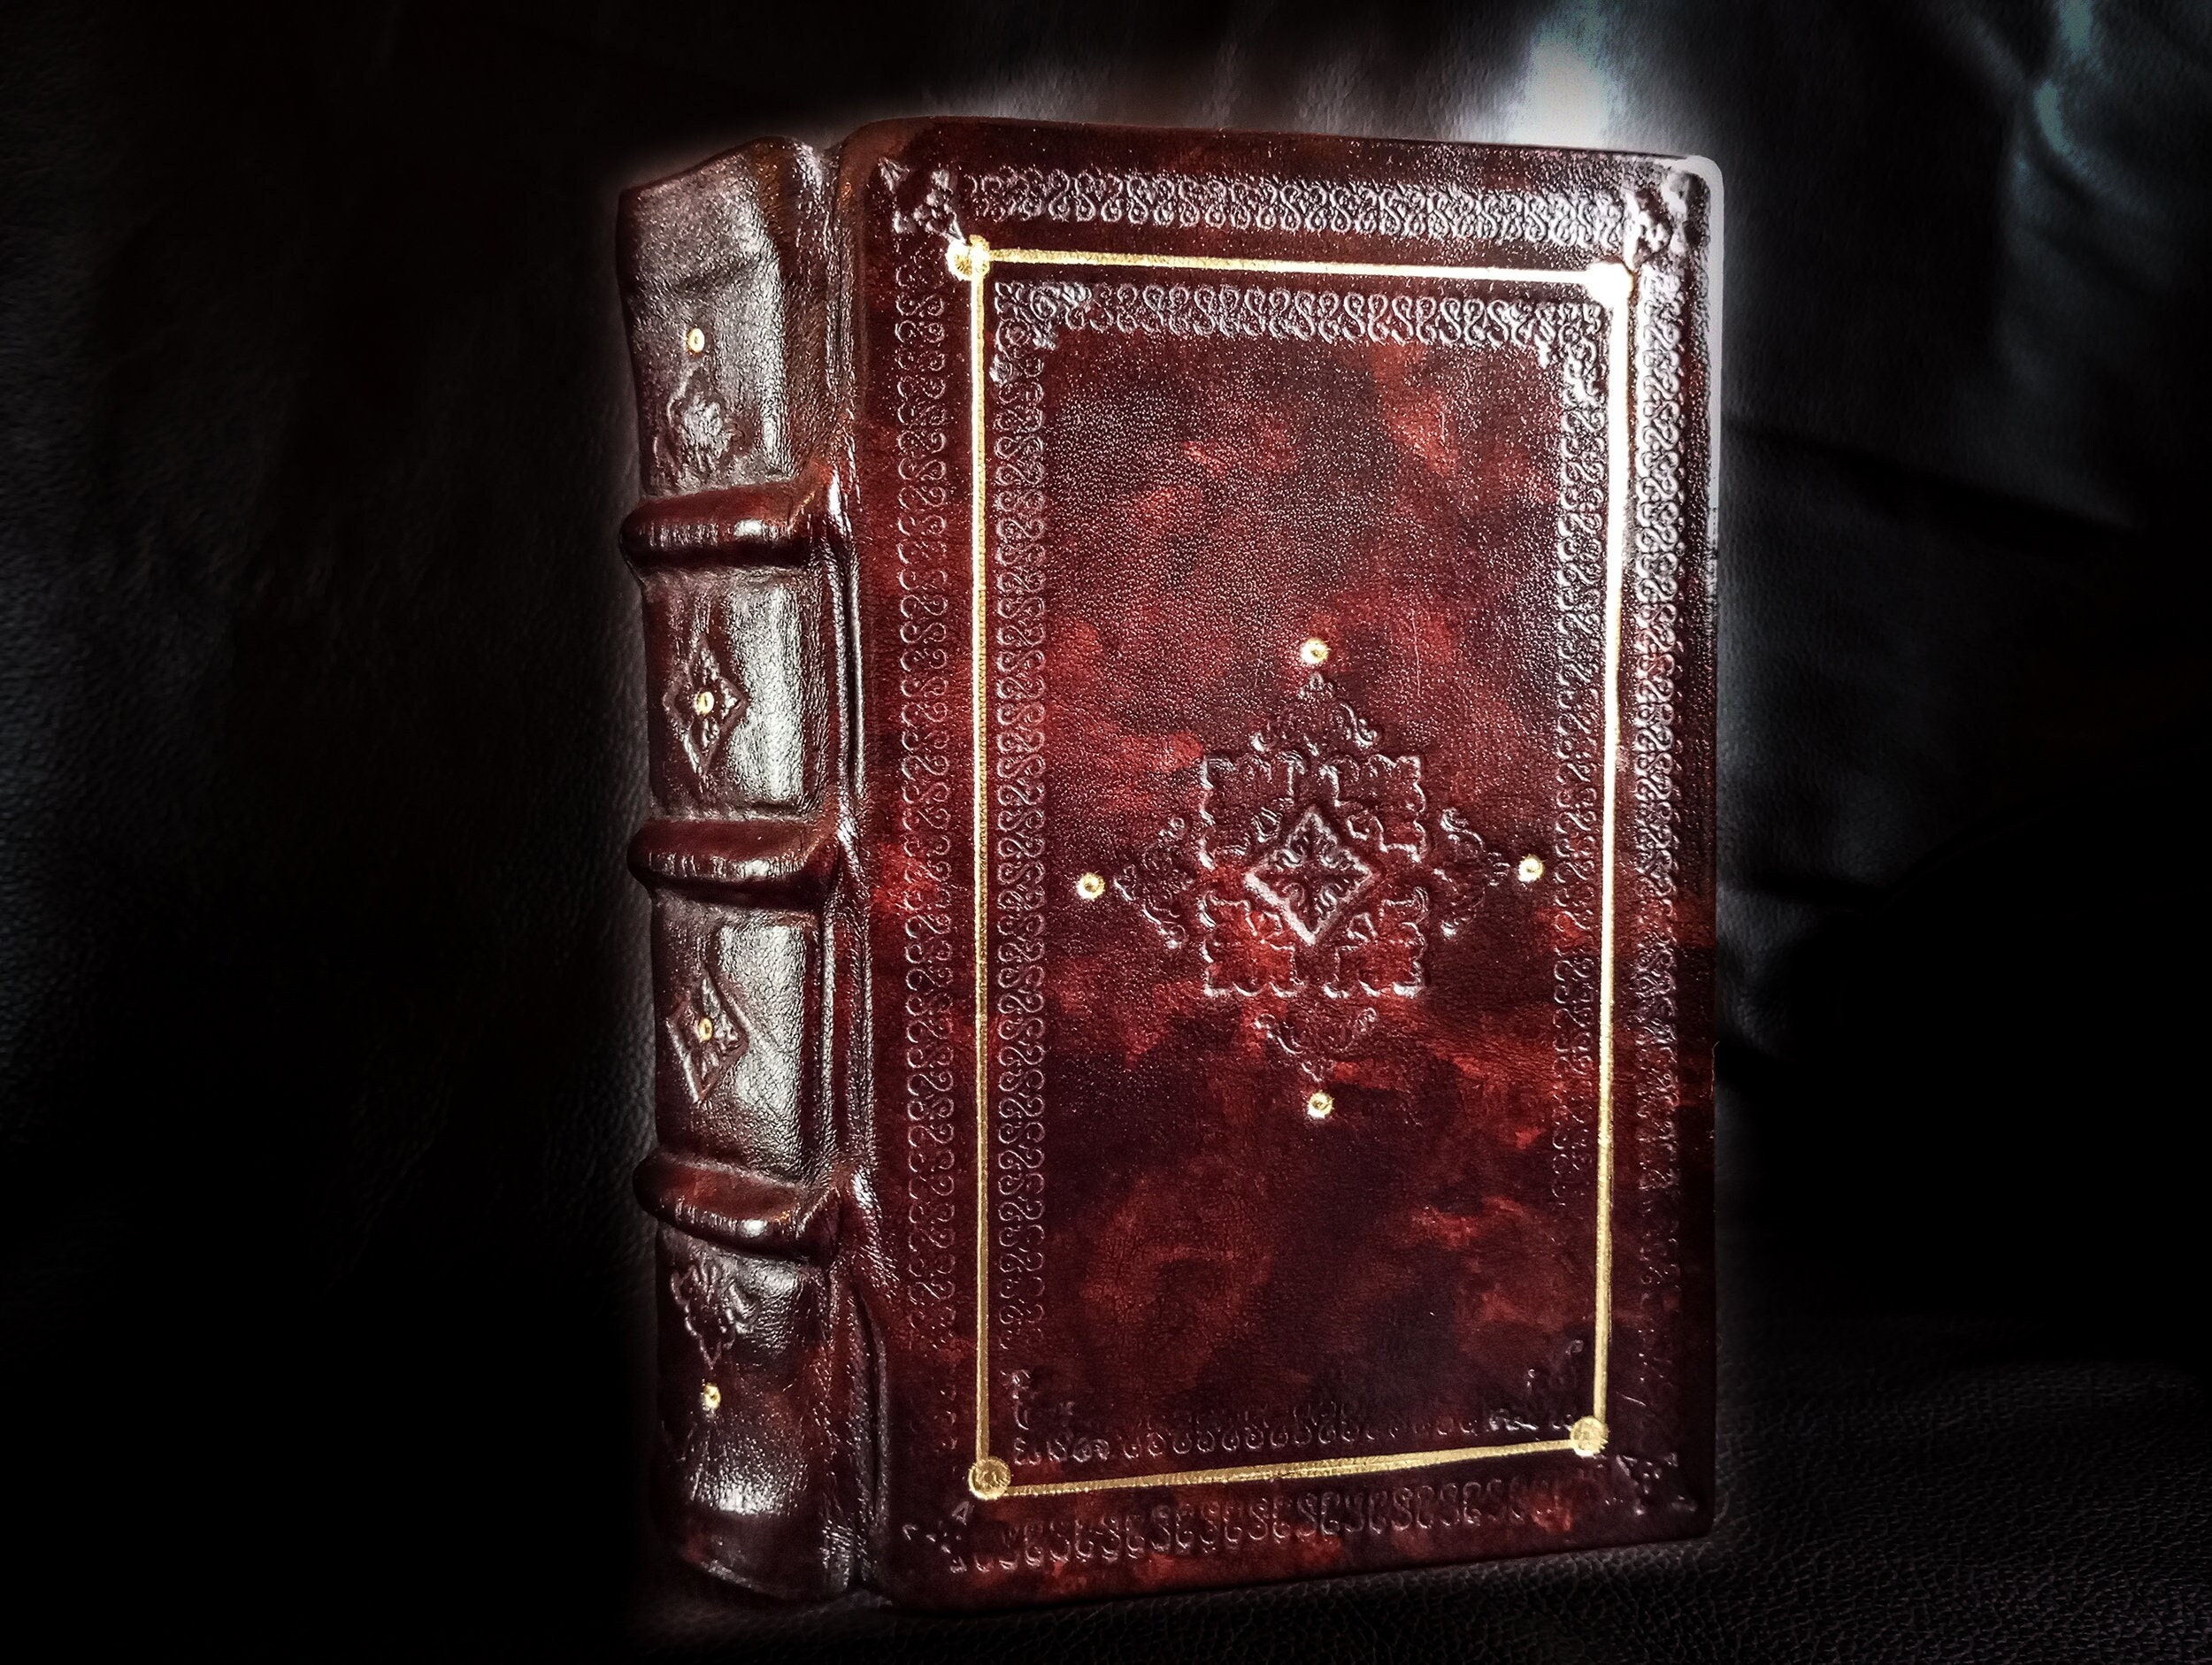 Hocus Pocus Spellbook Replica - Manual of Witchcraft and Alchemy Blank Book  / Journal (Inspired by Hocus Pocus) - Geekify Inc